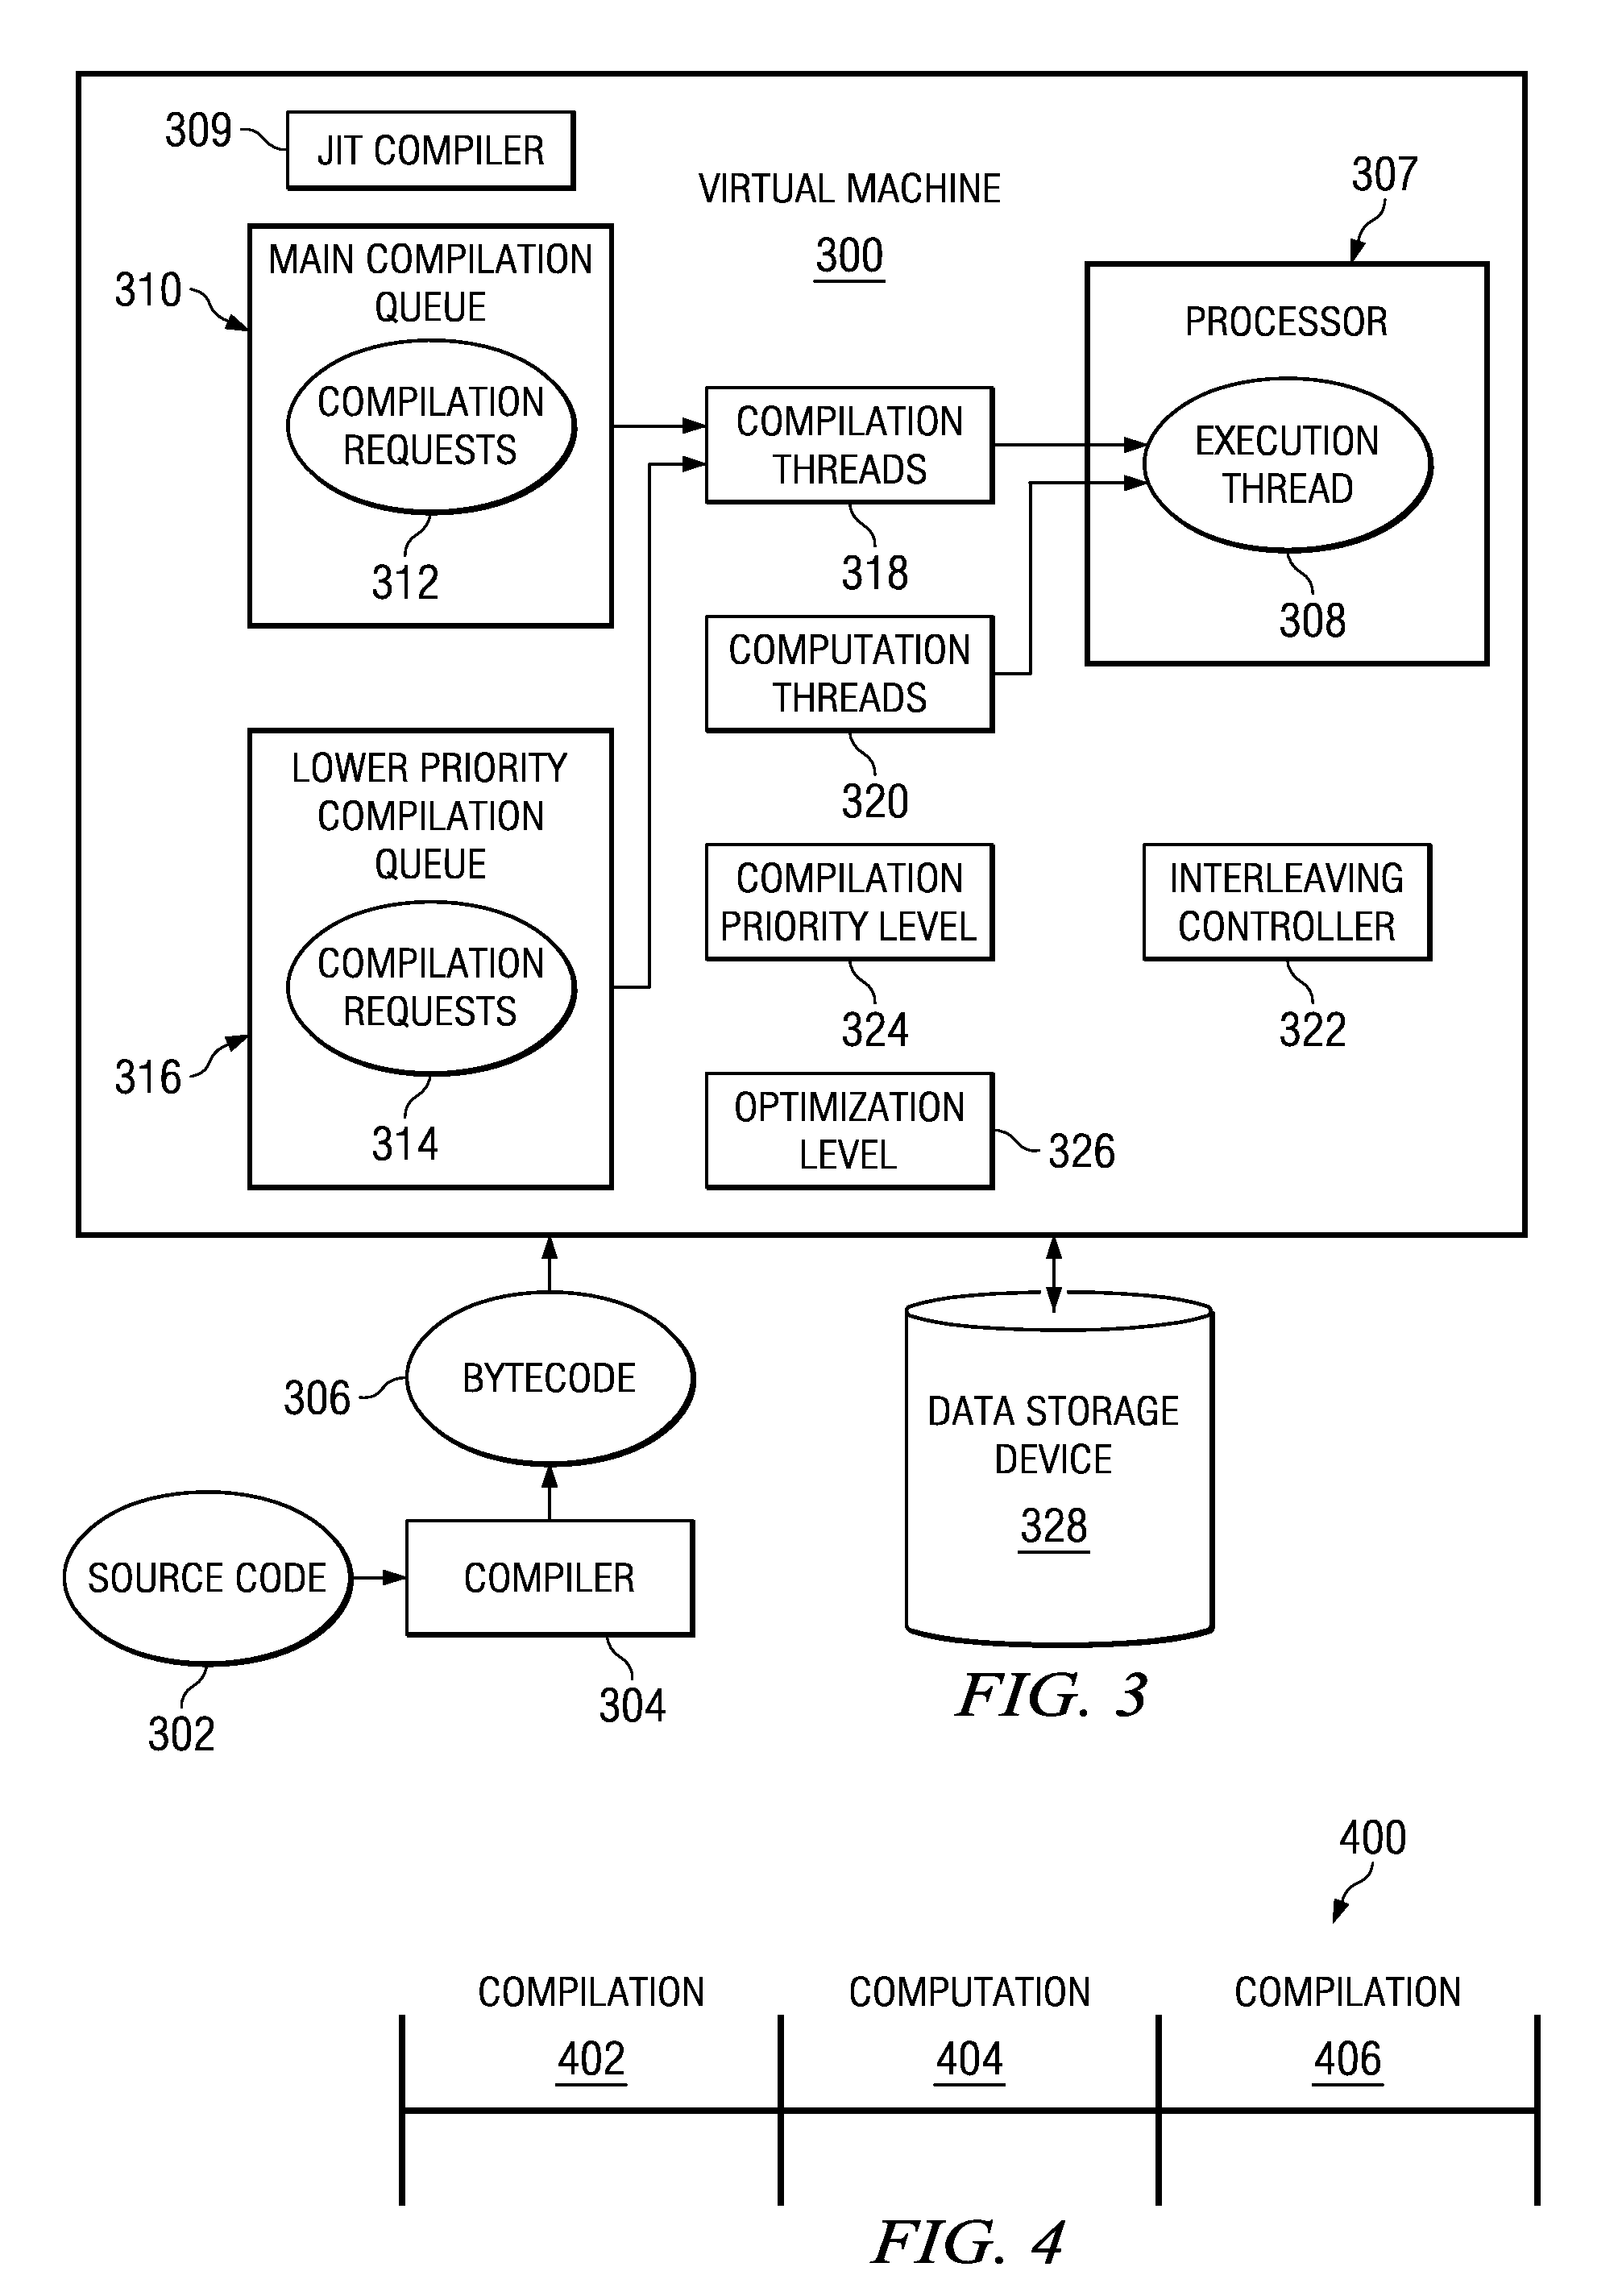 Method and apparatus to improve the running time of short running applications by effectively interleaving compilation with computation in a just-in-time environment